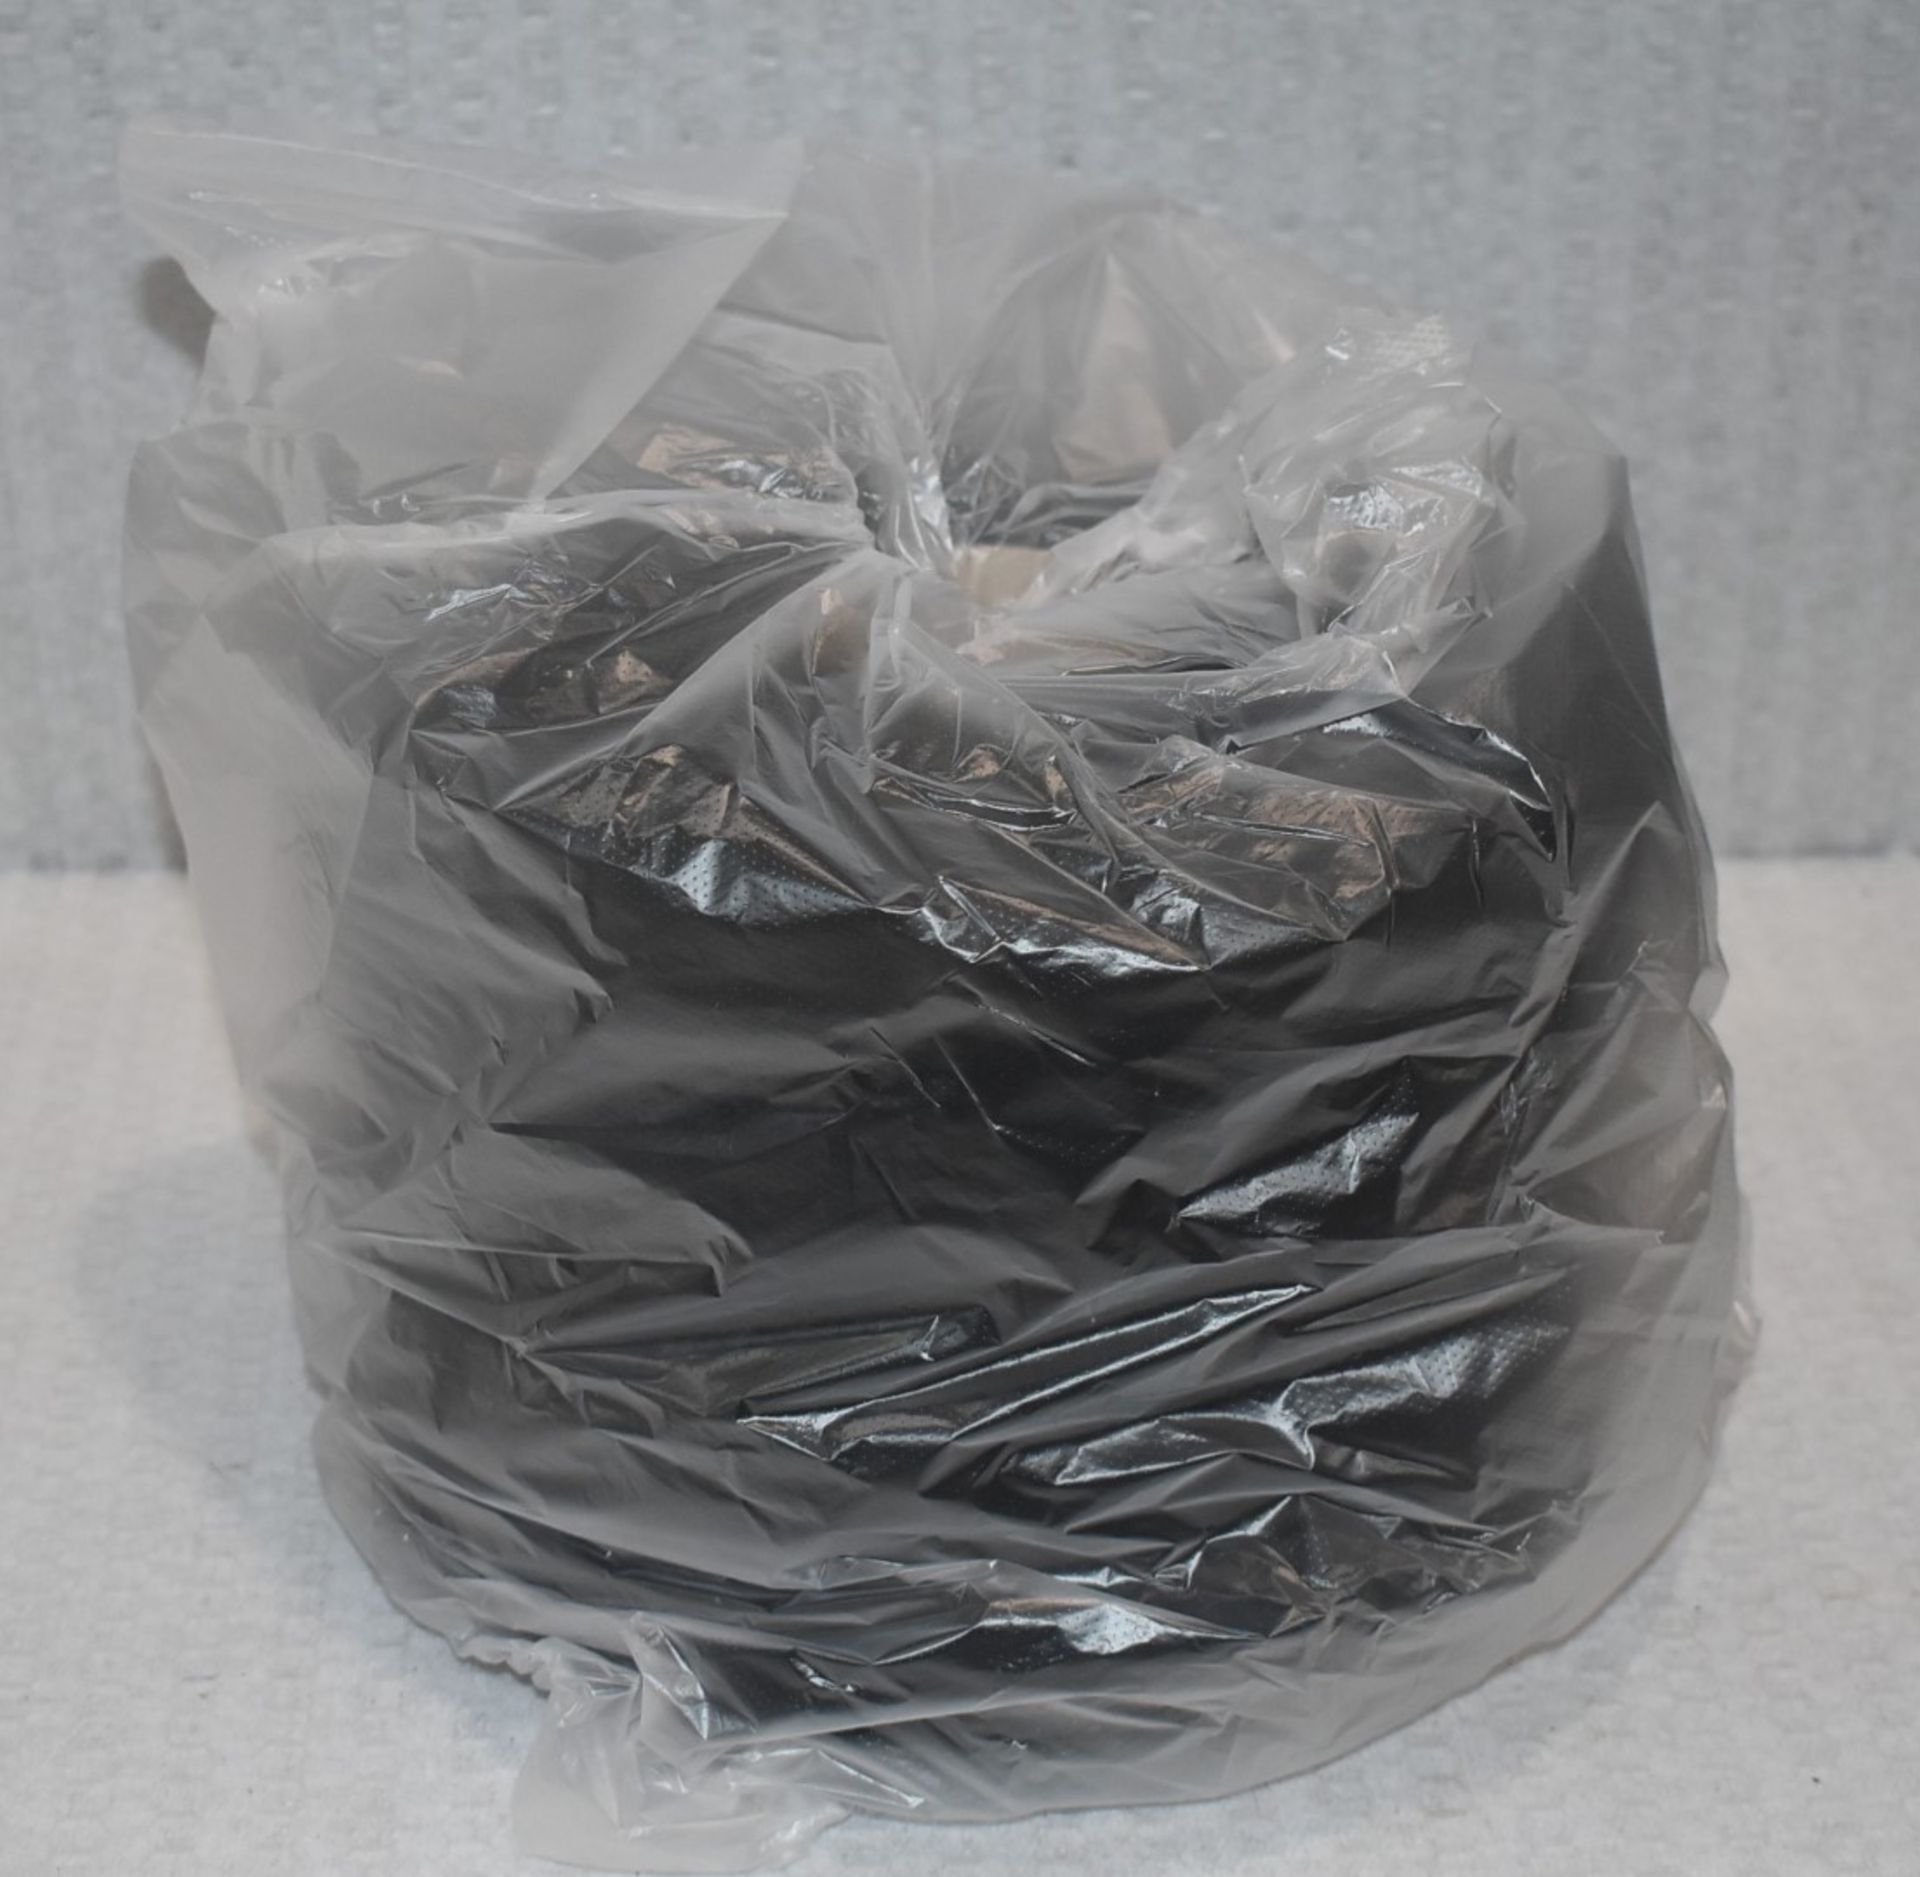 1 x Cone of 1/7,5 Lagona Knitting Yarn - Charcoal - Approx Weight: 2,300g - New Stock ABL Yarn - Image 3 of 9